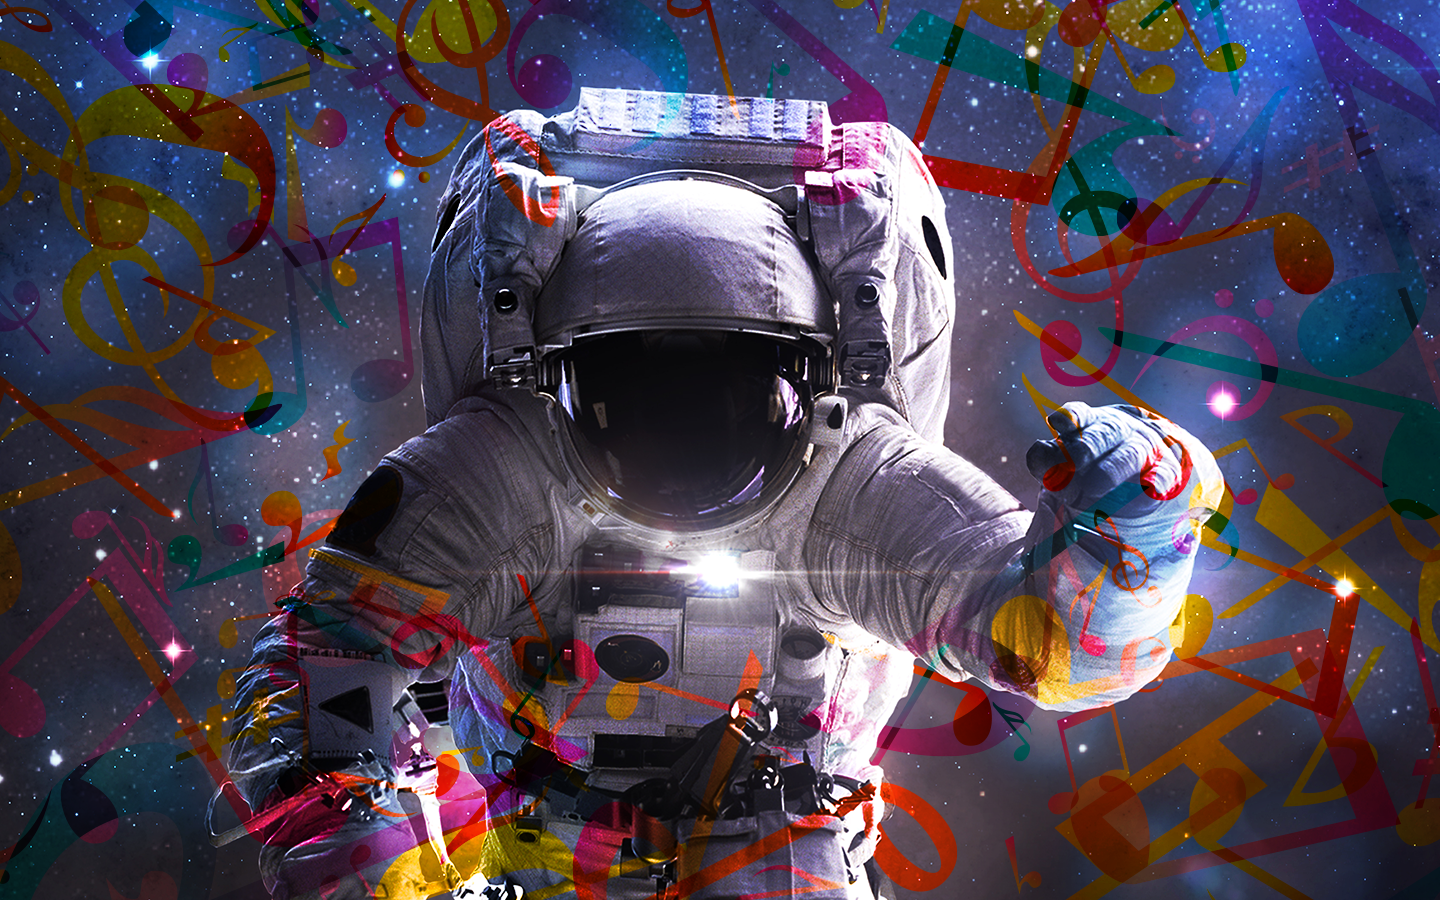 Free download Psychedelic Astronaut Image [1600x900] for your Desktop, Mobile & Tablet. Explore Psychedelic Astronaut Wallpaper. Psychedelic Astronaut Wallpaper, Astronaut Wallpaper, Astronaut Wallpaper